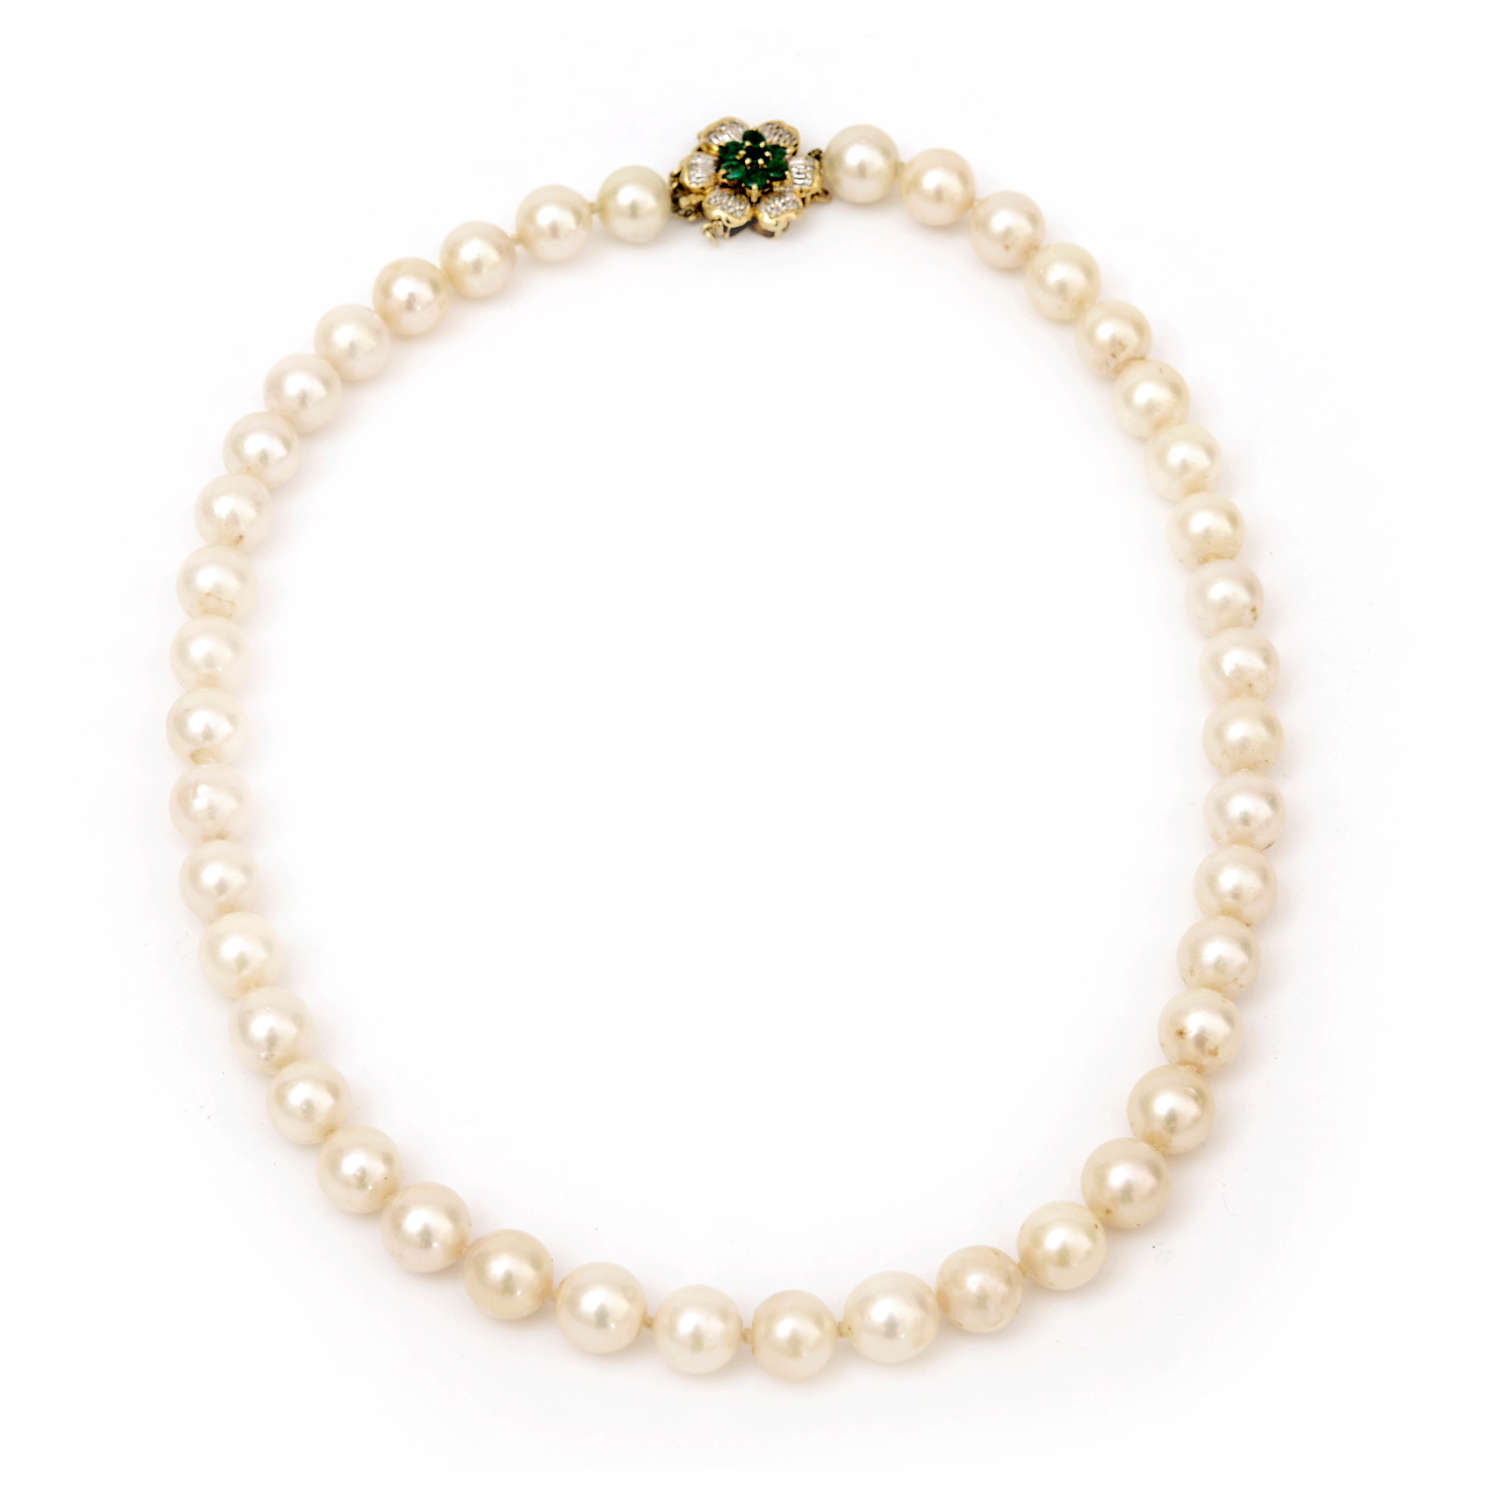 Cultured pearl necklace with emerald and diamond clasp